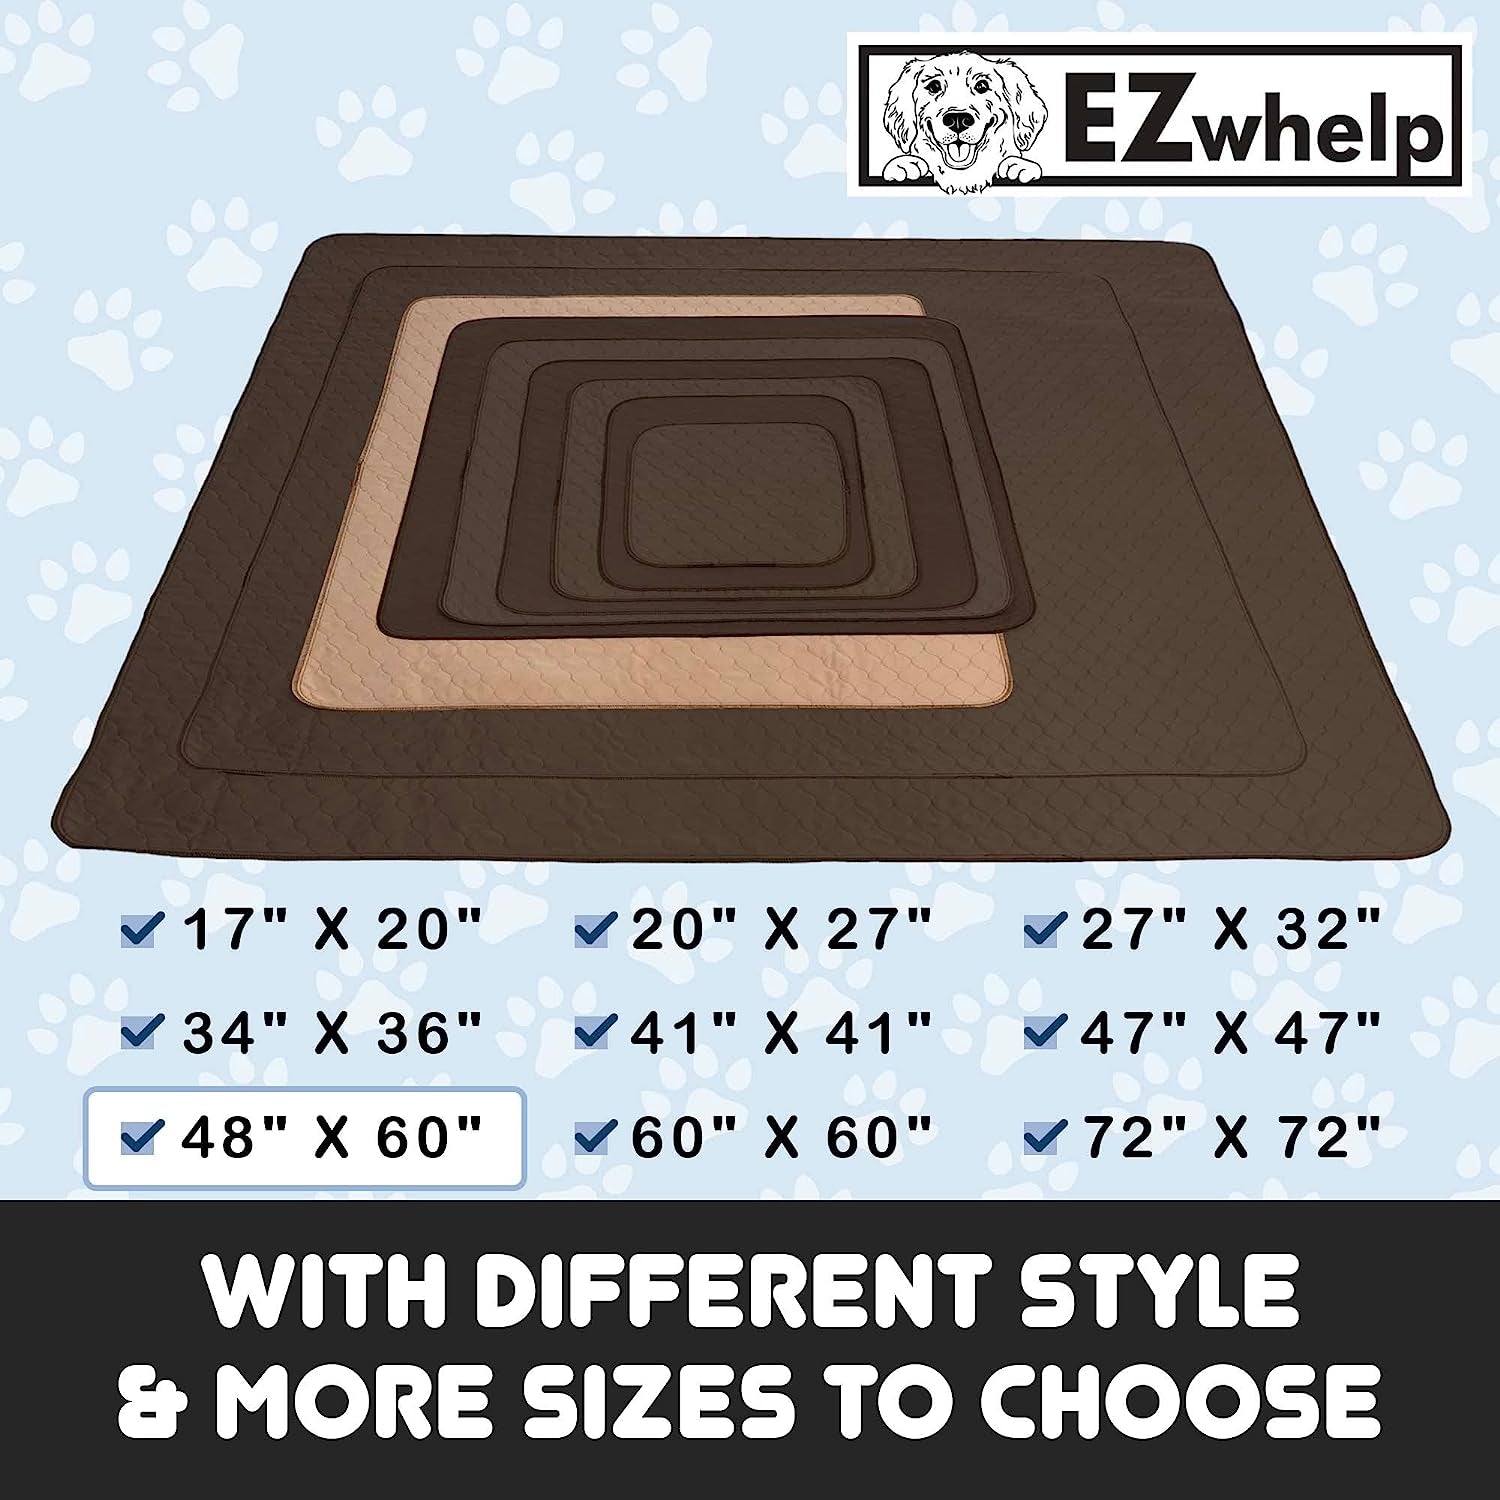 Reusable Dog Pee Pads - Waterproof Training Pads for Dogs - Washable & Sanitary - Rounded Corners - Laminated, Lightweight, and Durable - Perfect Pet Essentials for Puppy Training and Whelping - 48" X 60"